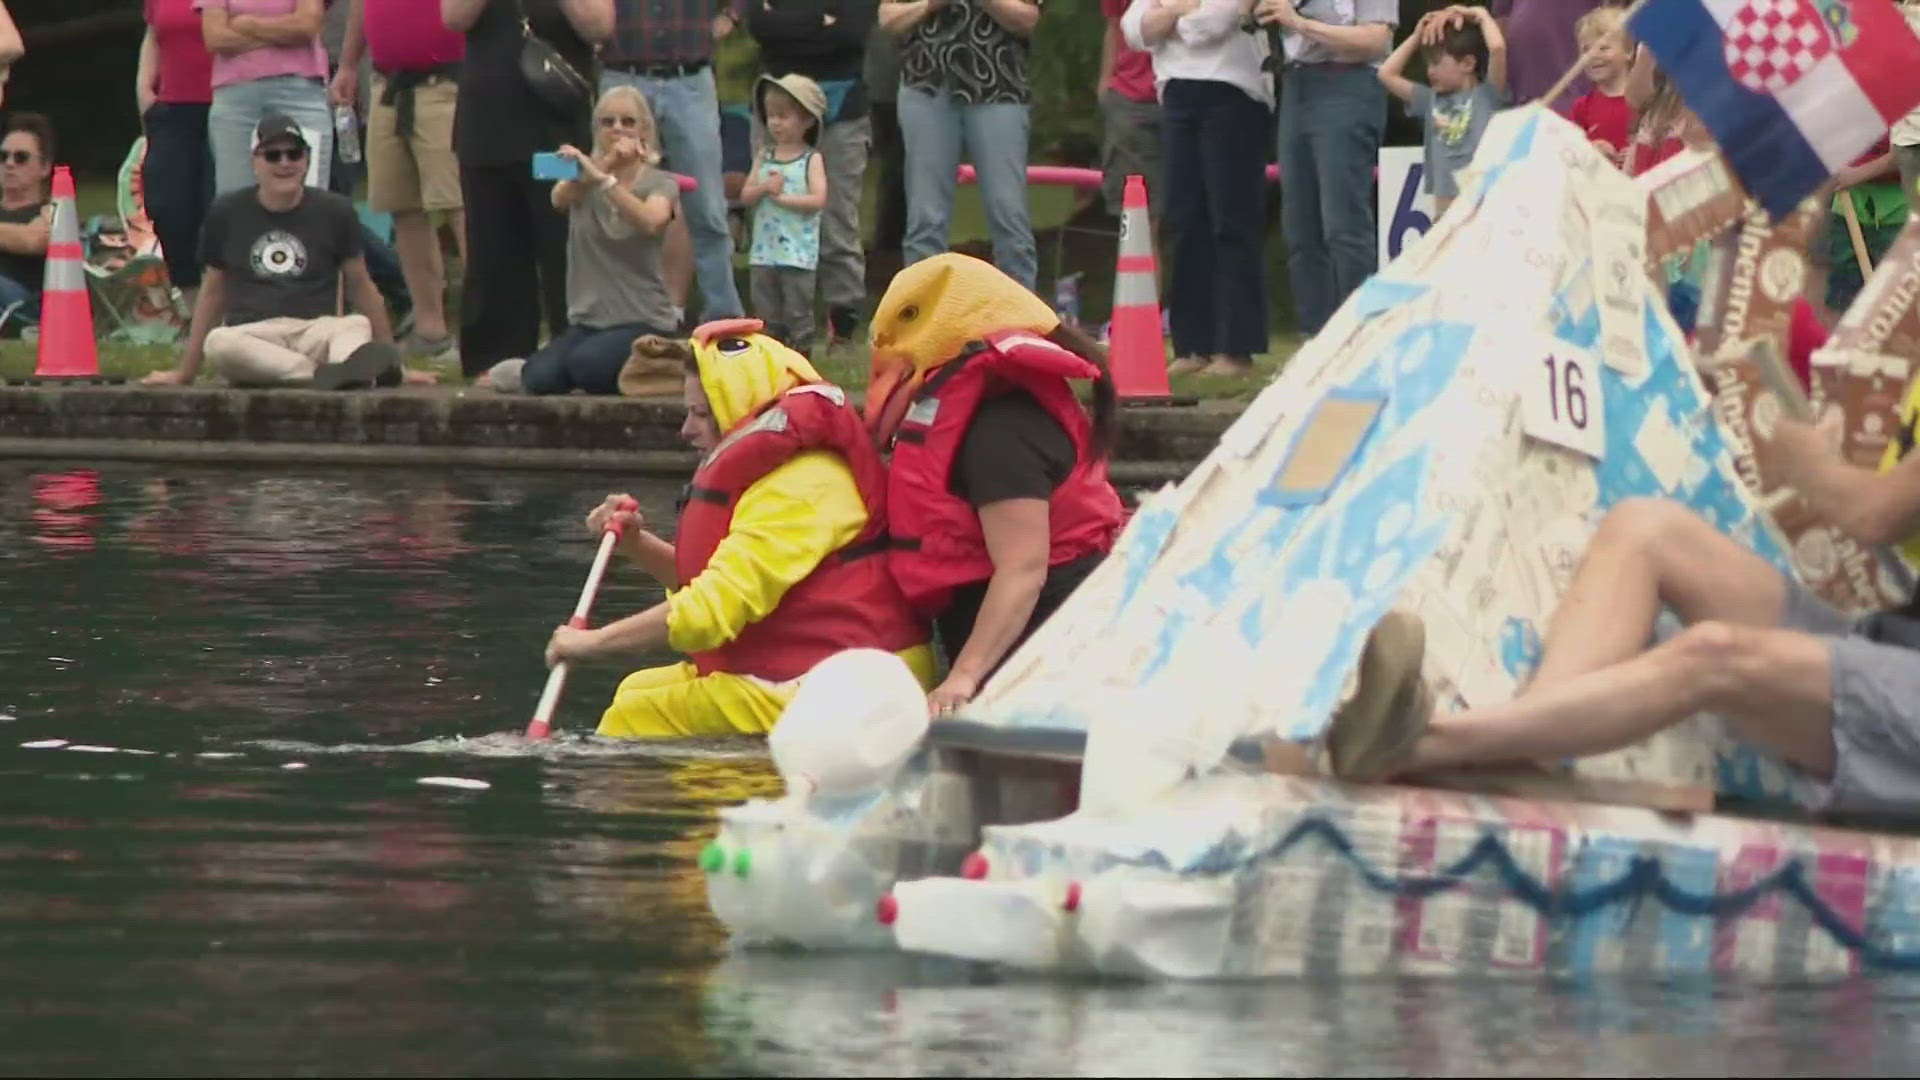 The "Royal Rosarian Milk Carton Boat Race" is the last event of this year's Rose Festival.